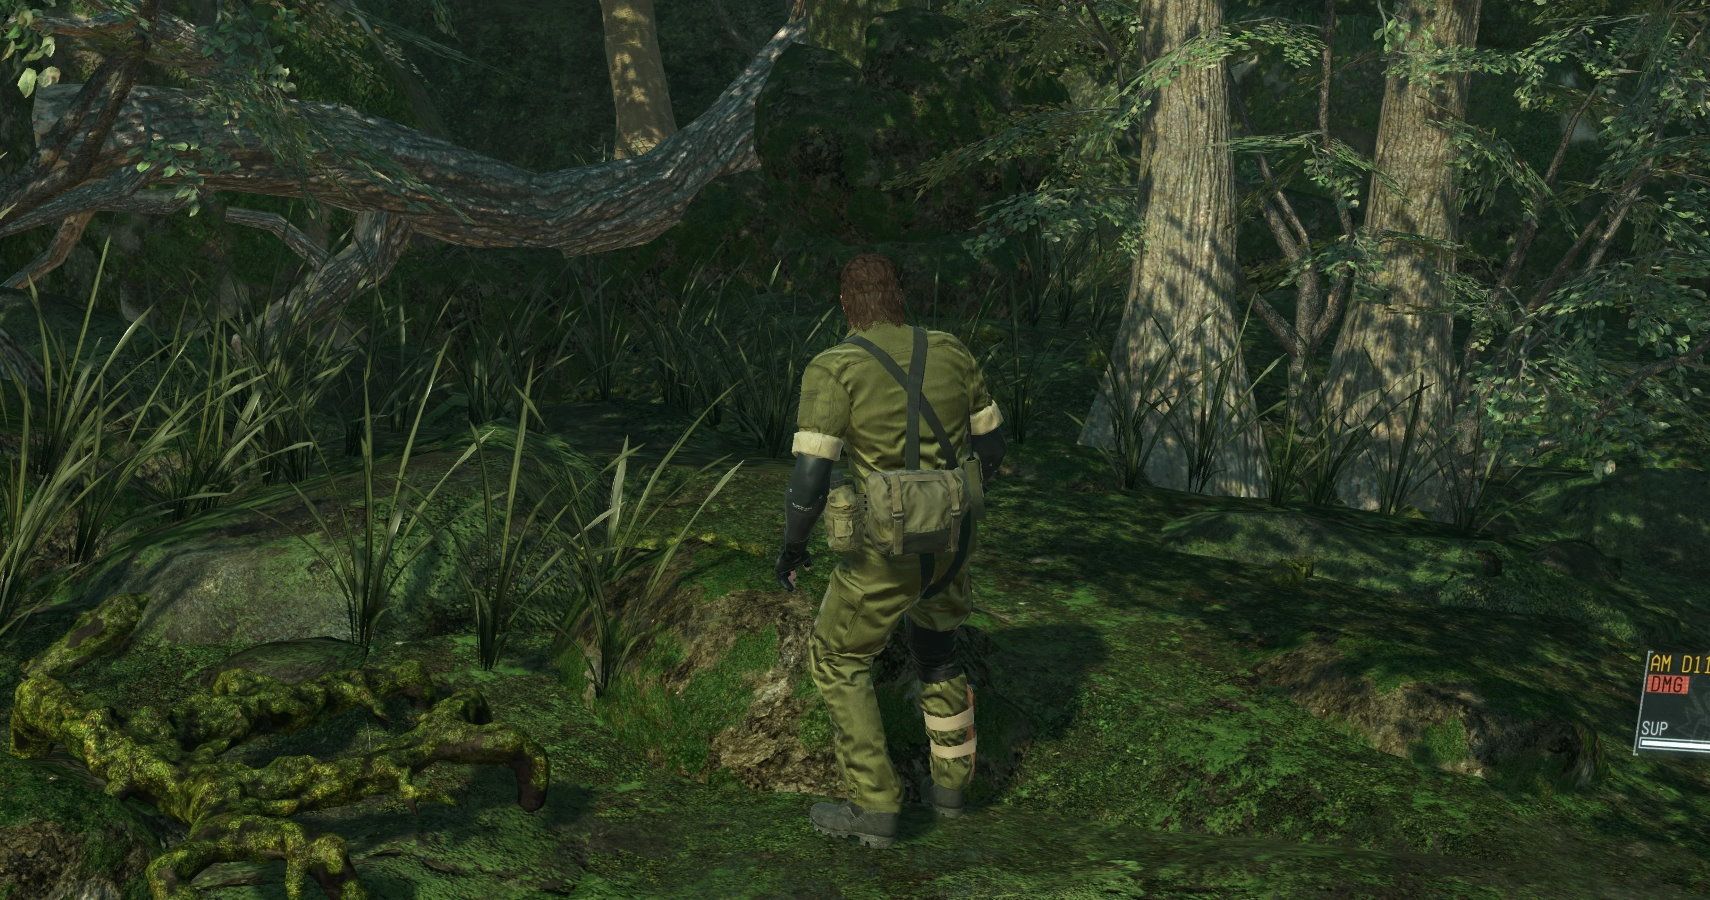 Metal Gear Solid Collection fan quickly releases 4K mod